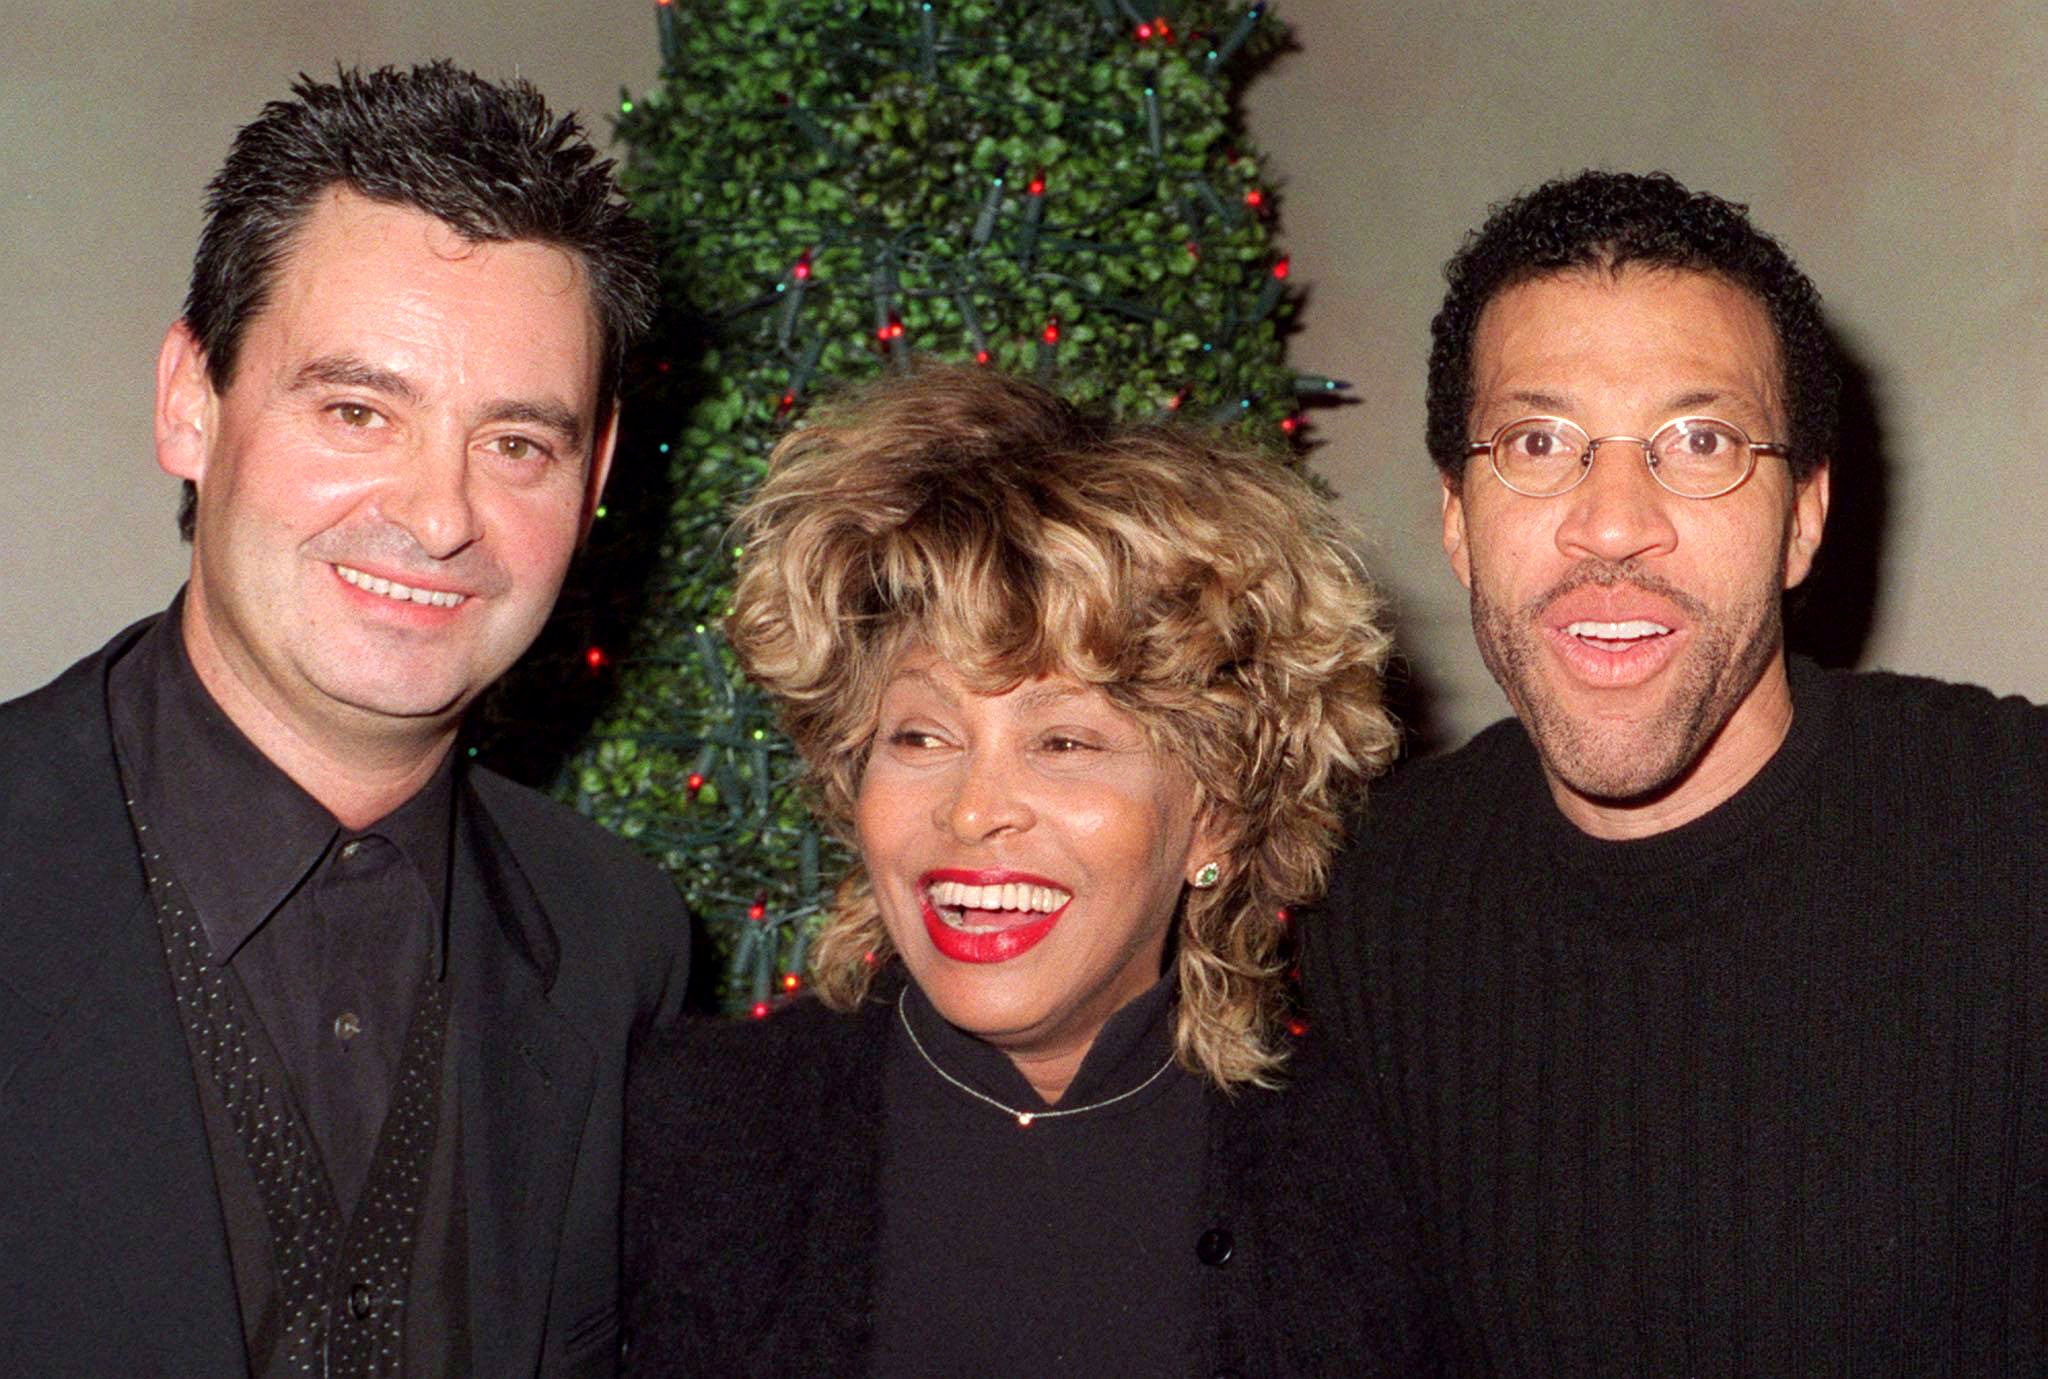 Tina Turner with Erwin Bach and Lionel Richie